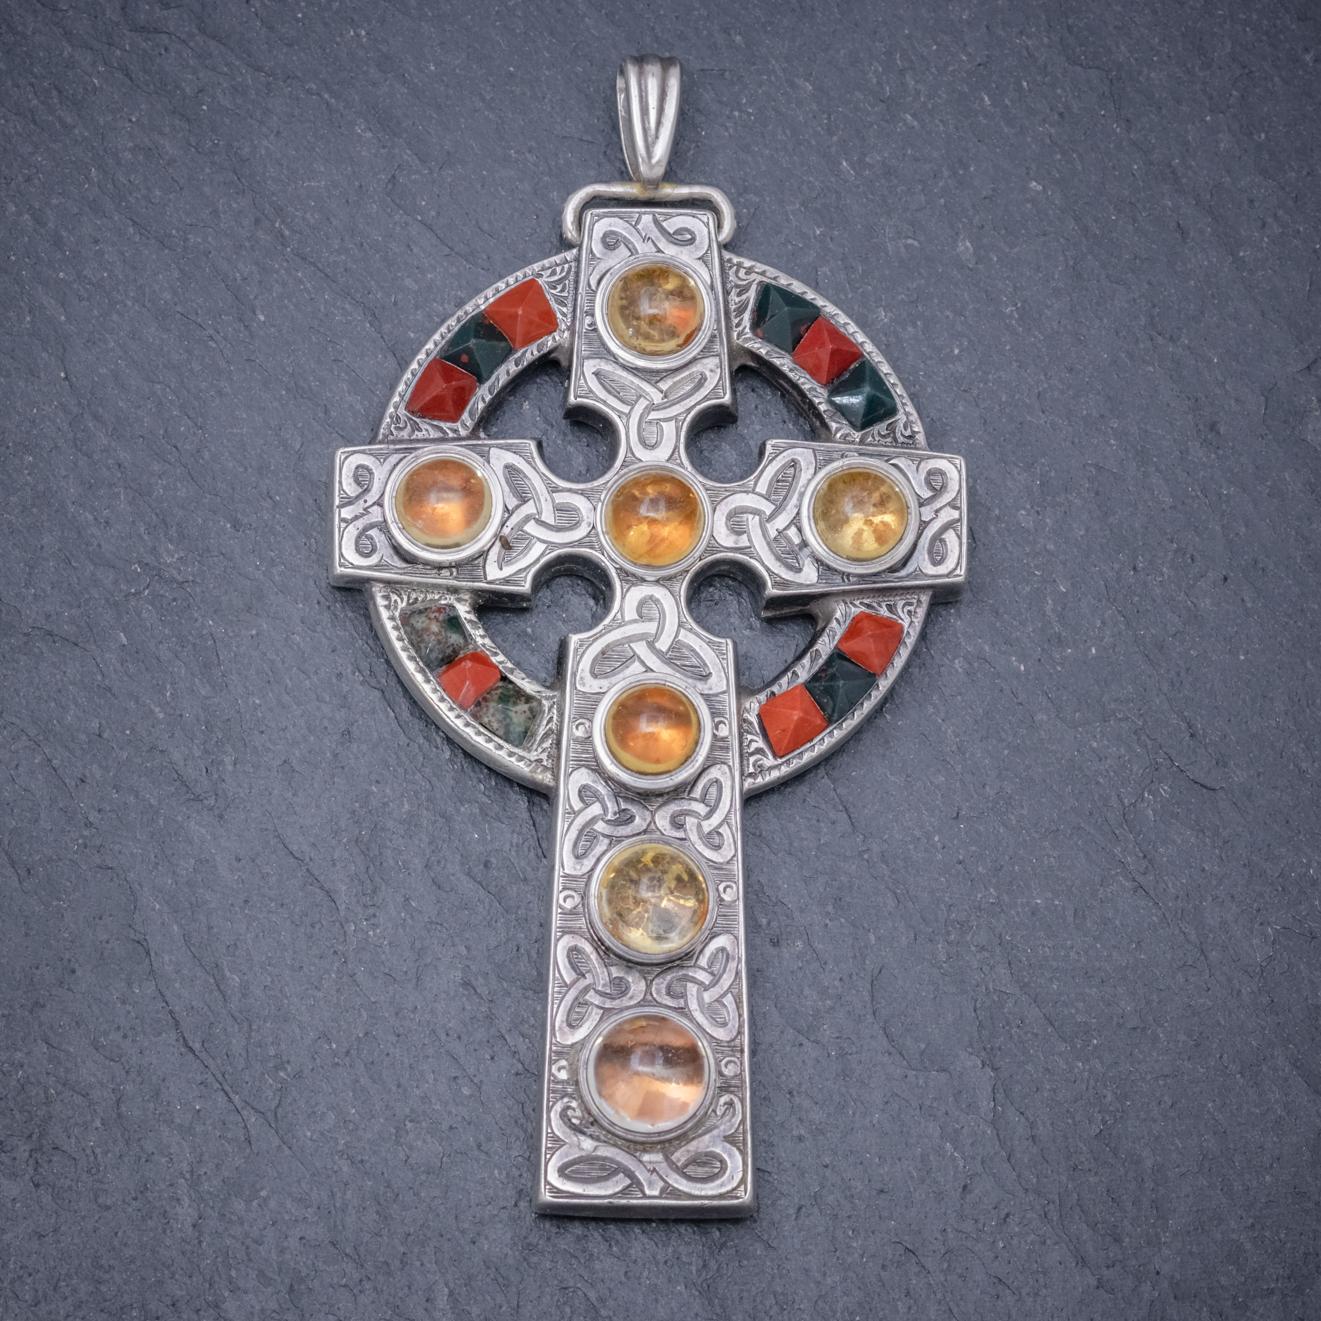 An exquisite antique Scottish cross pendant from the Victorian era decorated with pyramid cut Jasper and Carnelian stones with seven cabochon cut Cairngorms which glow with a bright golden hue.

The pendant is set in Sterling Silver and features